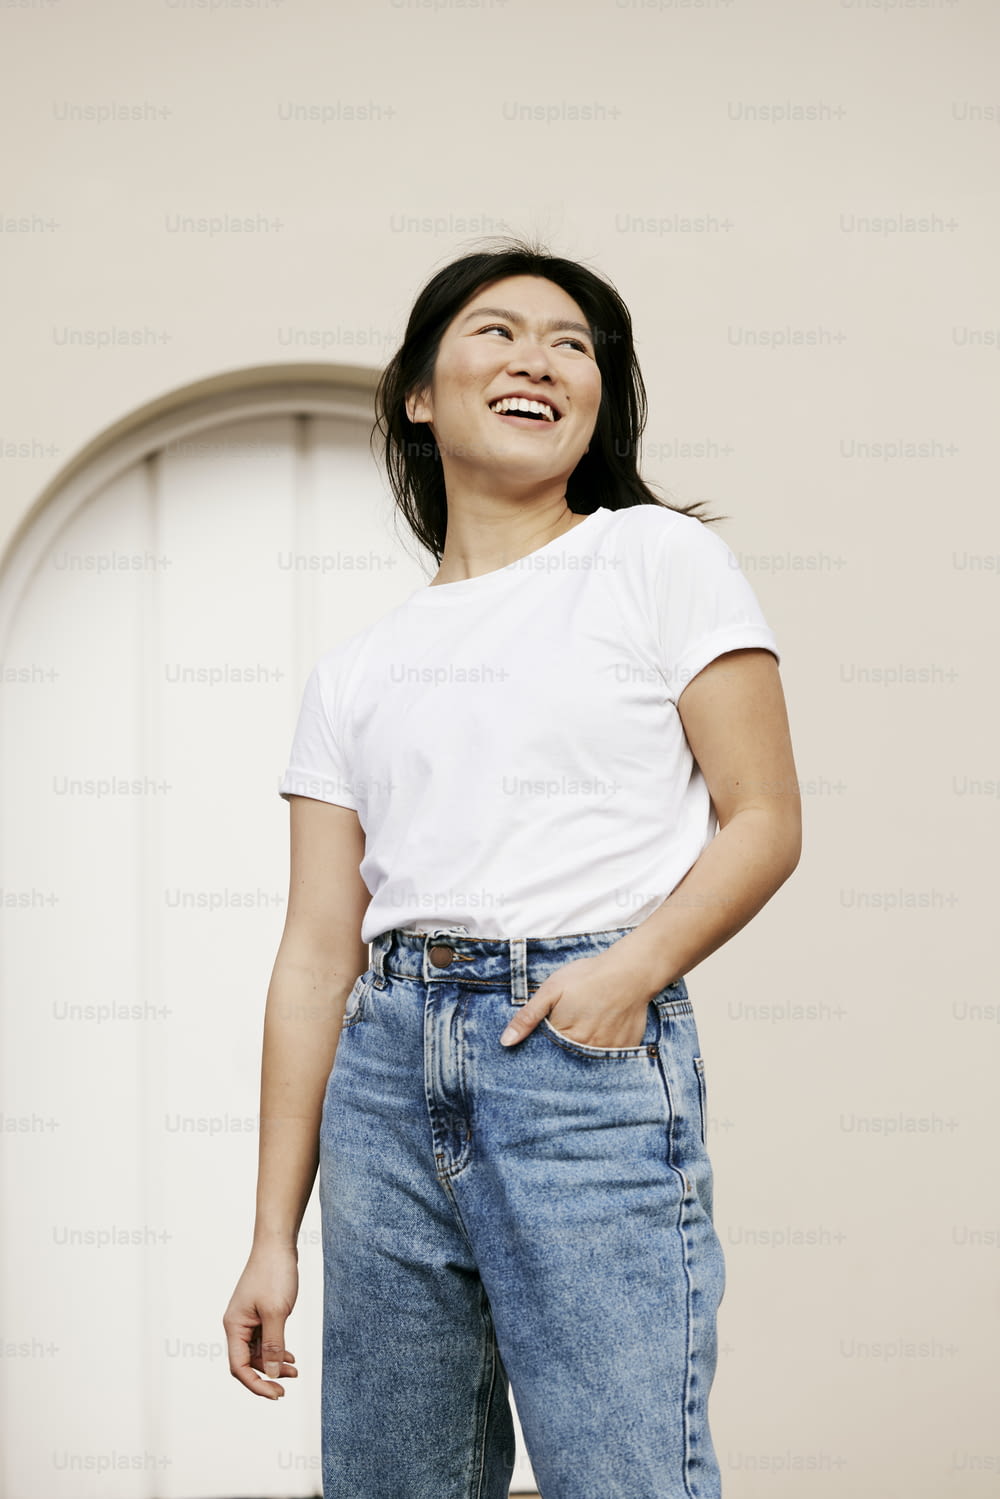 a woman in a white shirt and jeans laughing